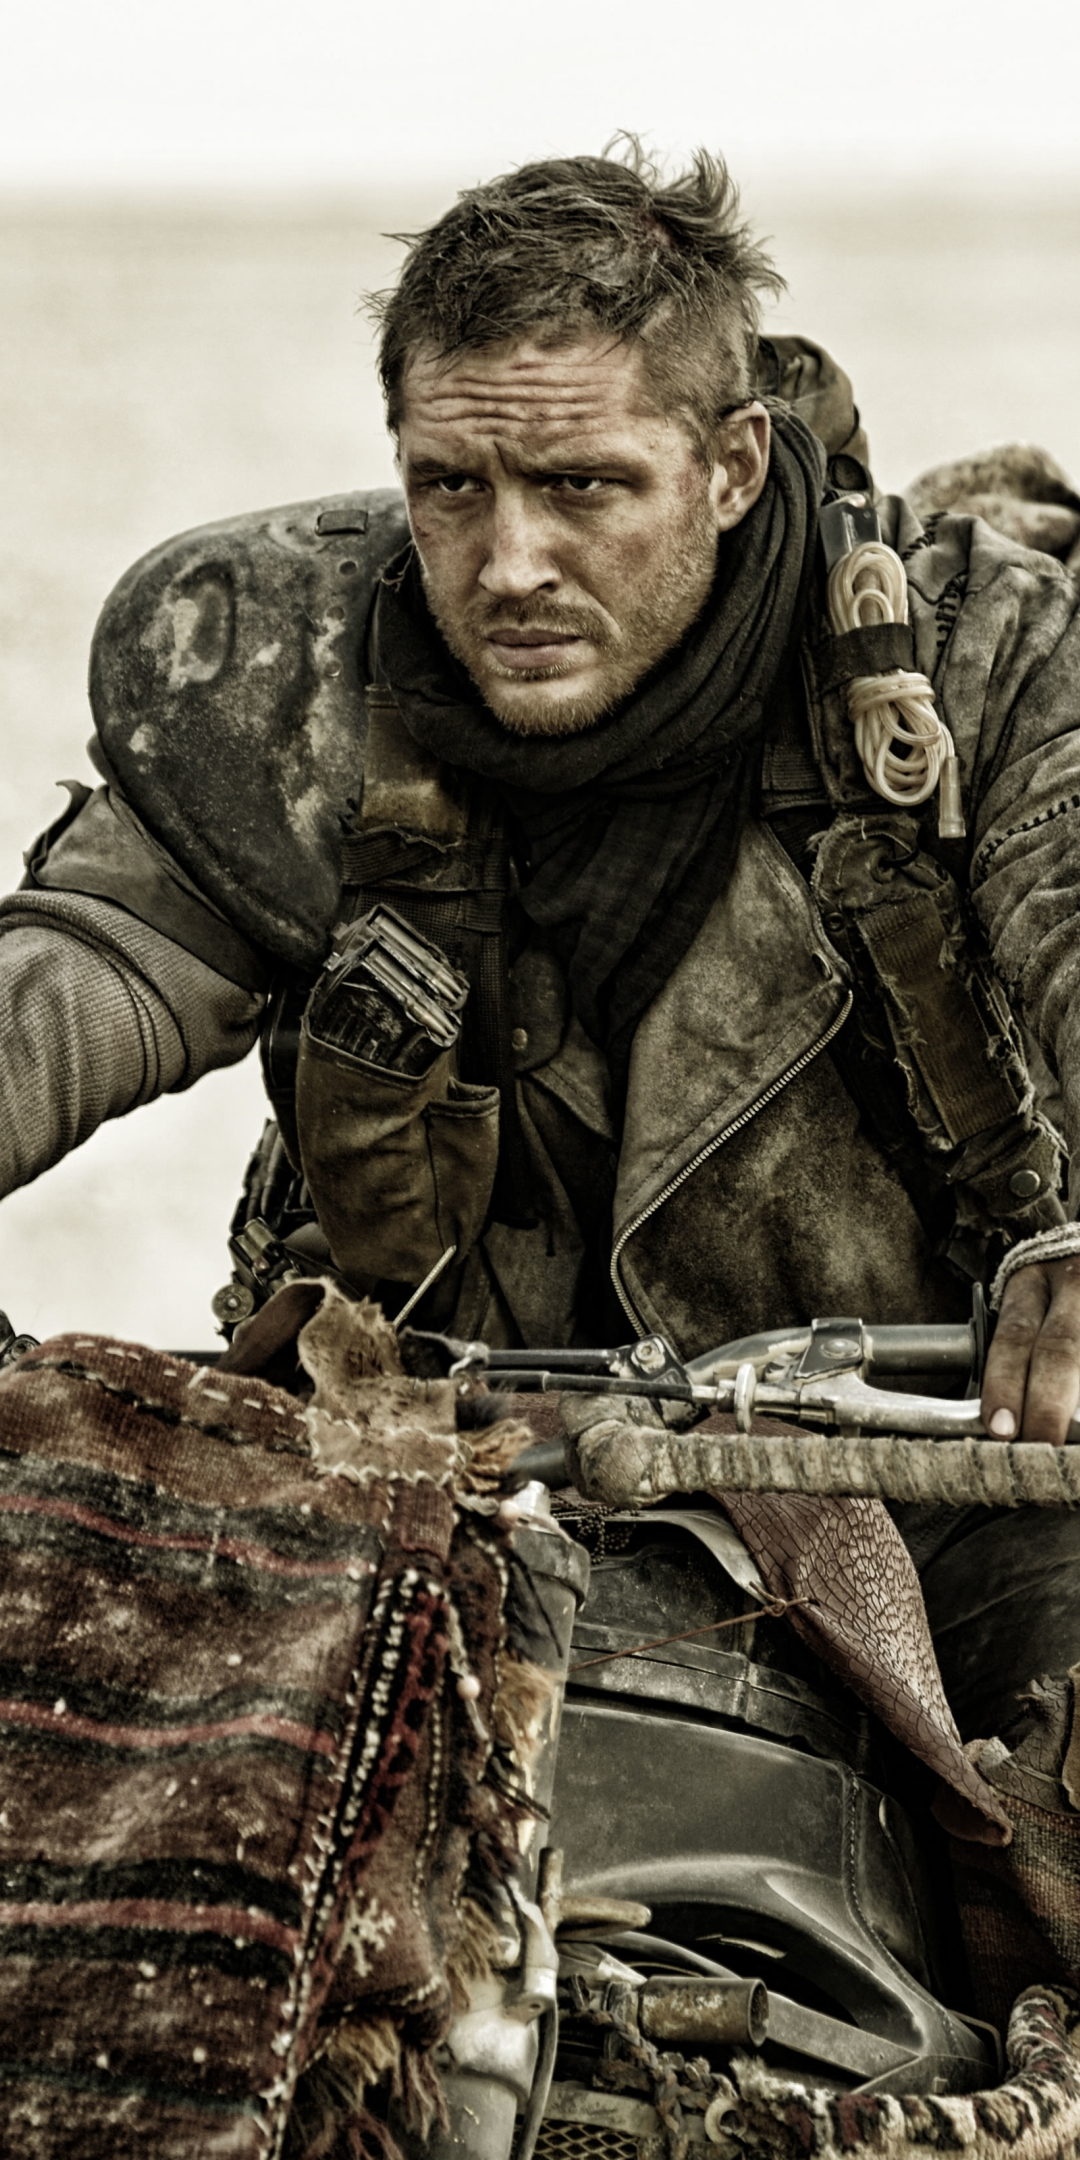 Mad Max Fury Road Tom Hardy Shemagh - HD Wallpaper 